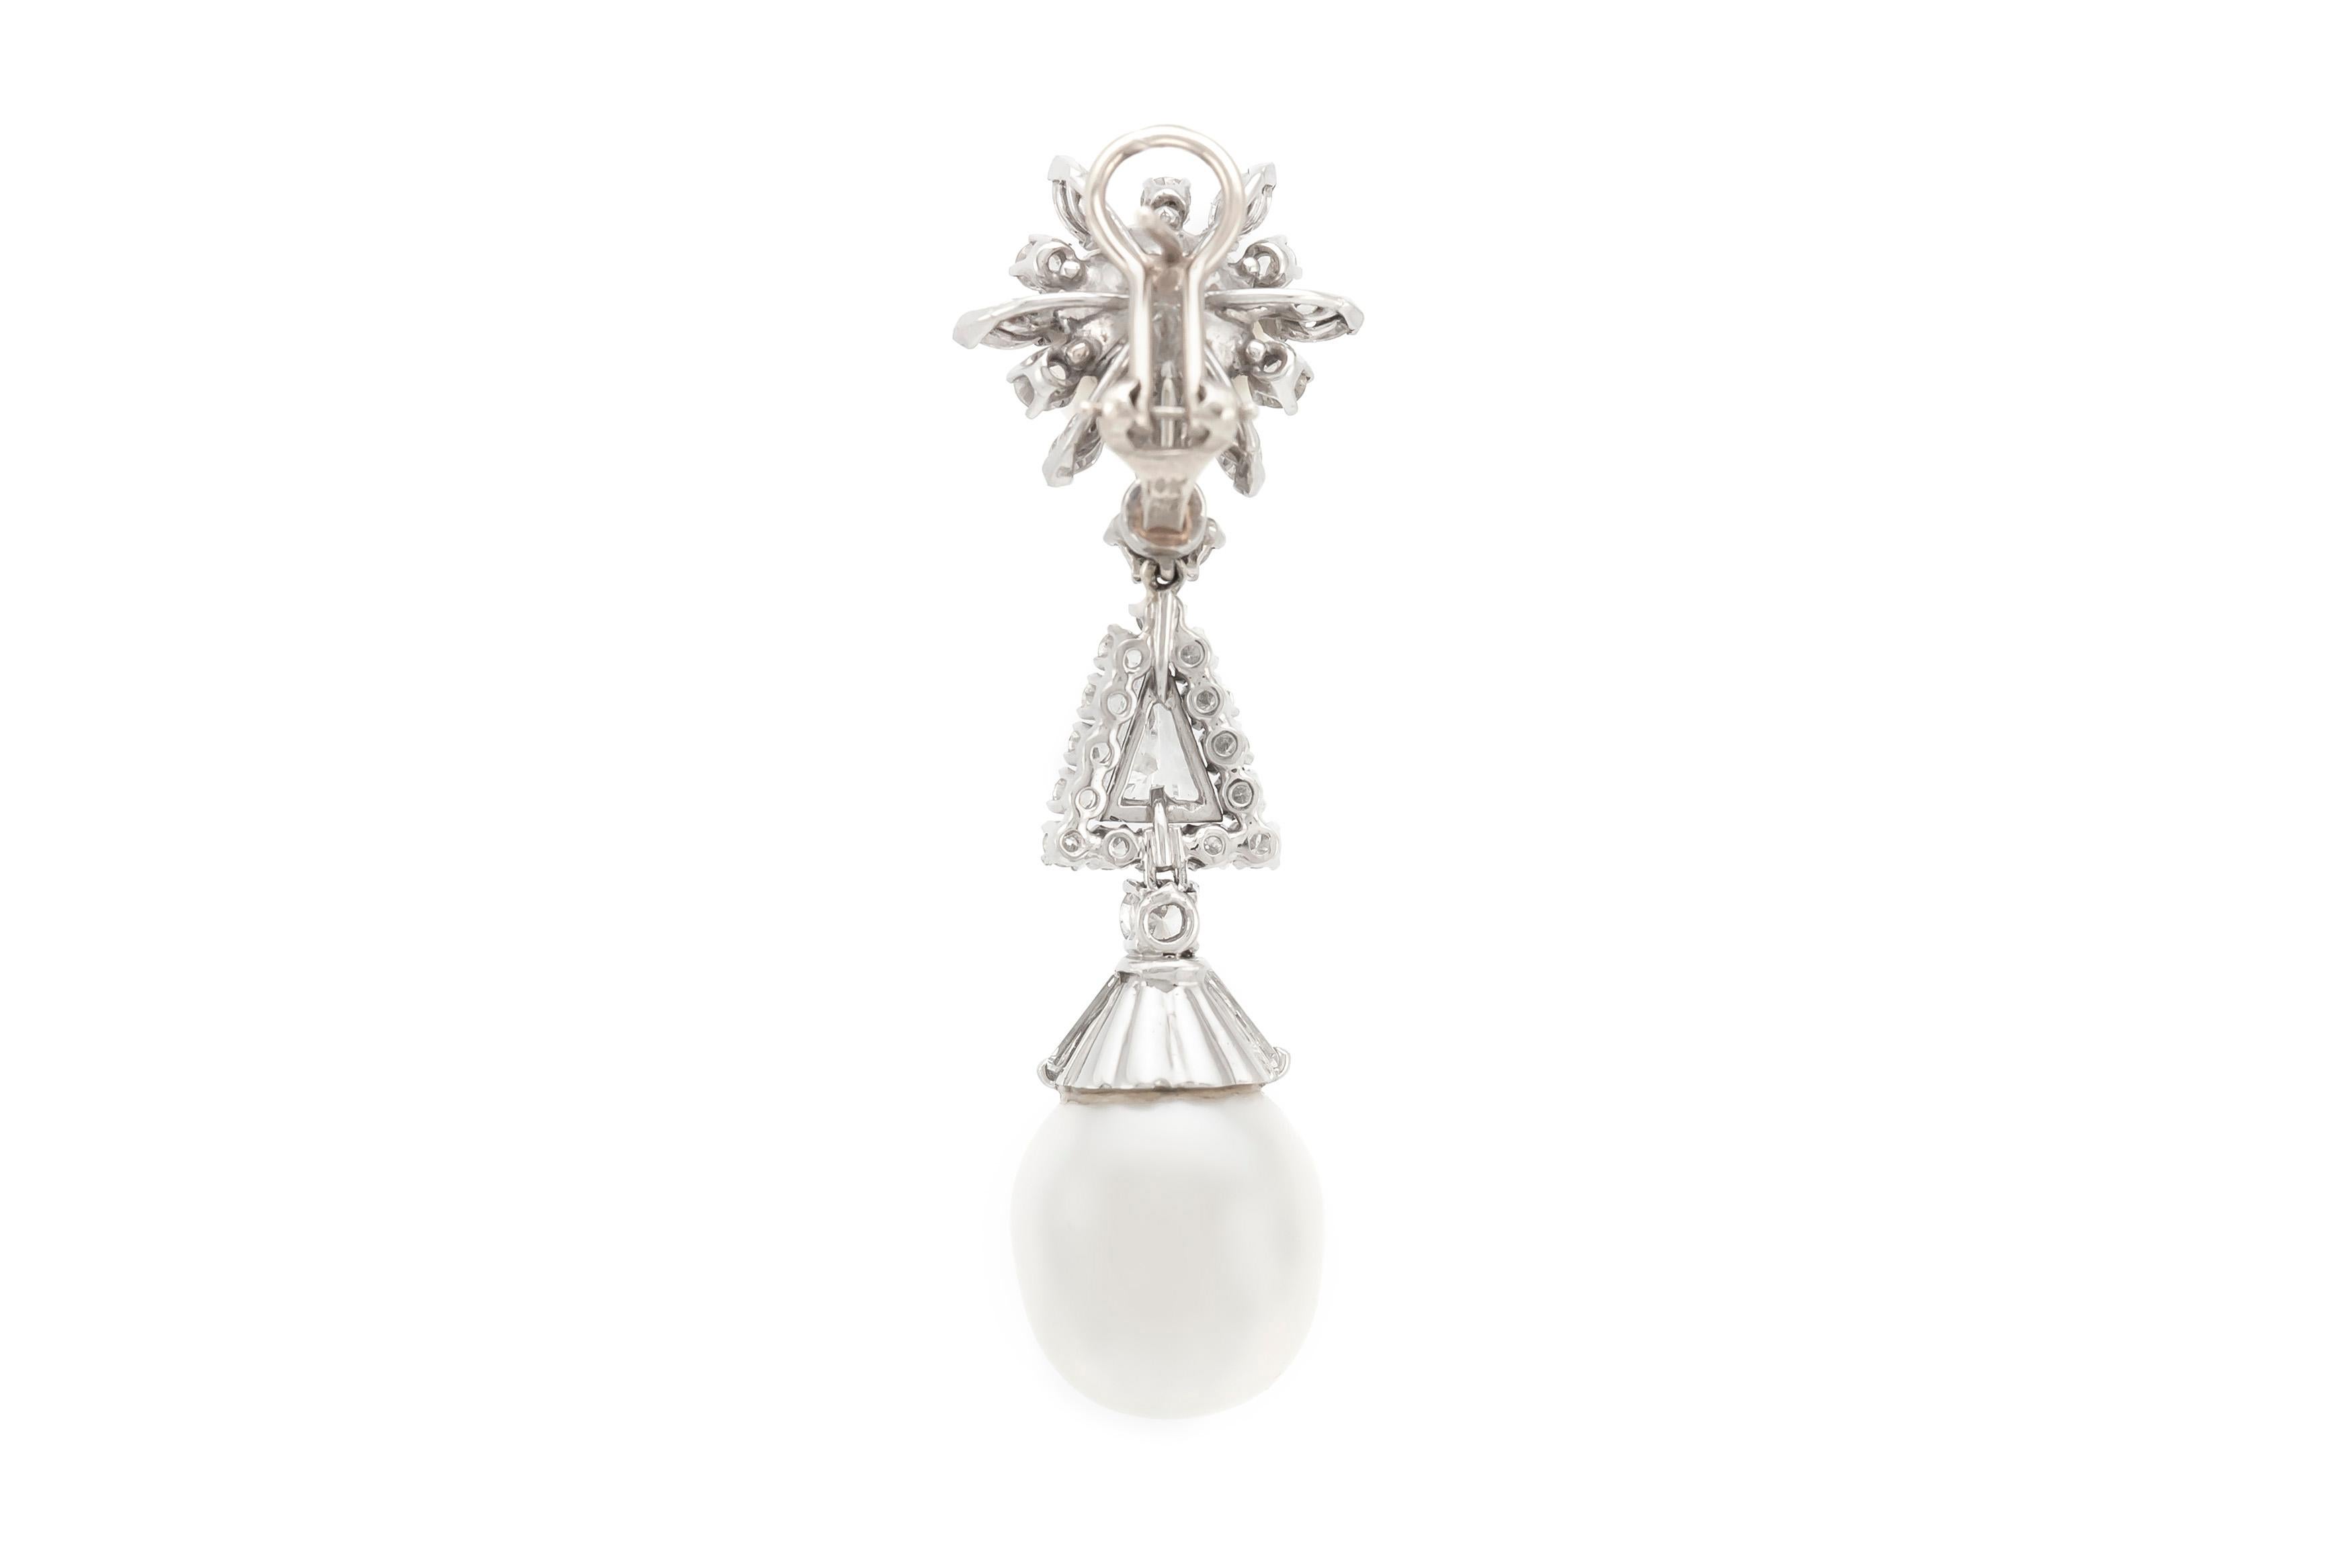 The earrings are finely crafted in platinum with four pearls two on top and two on the low level of the drop. With diamonds weighing approximately total of 3.00 carat.